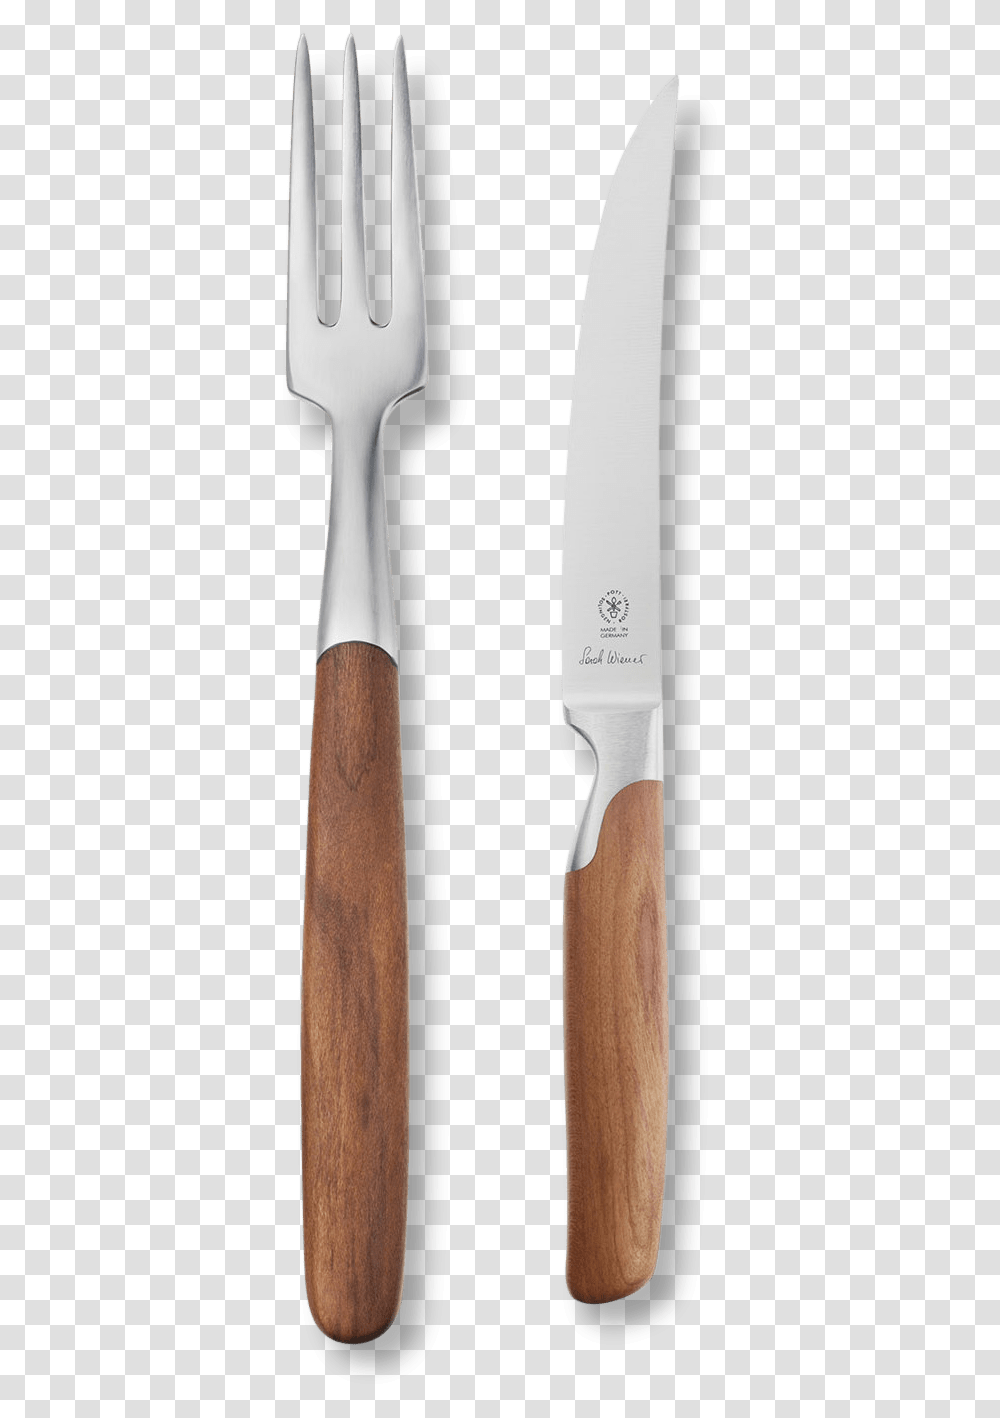 Steak Knife And Fork Set Gessato Steak Knife And Fork, Weapon, Weaponry, Blade Transparent Png